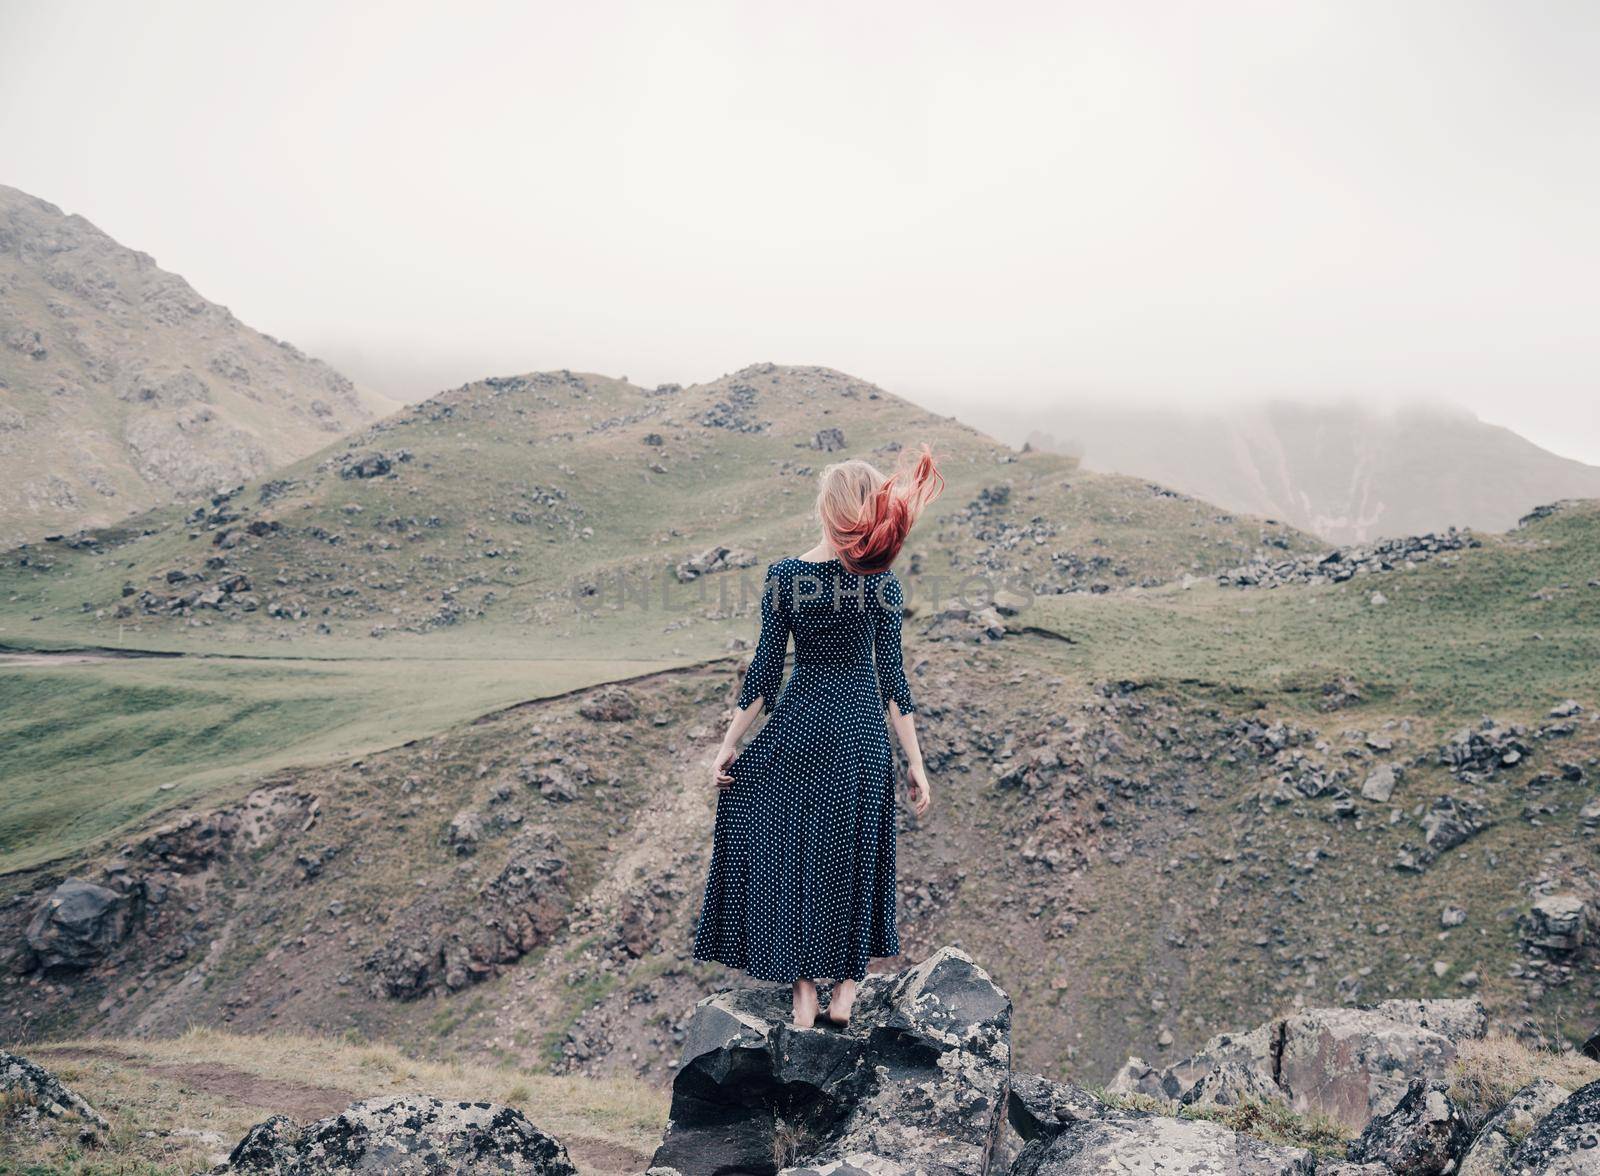 Young woman wearing in long dress standing on rocky stone in the mountains, rear view.